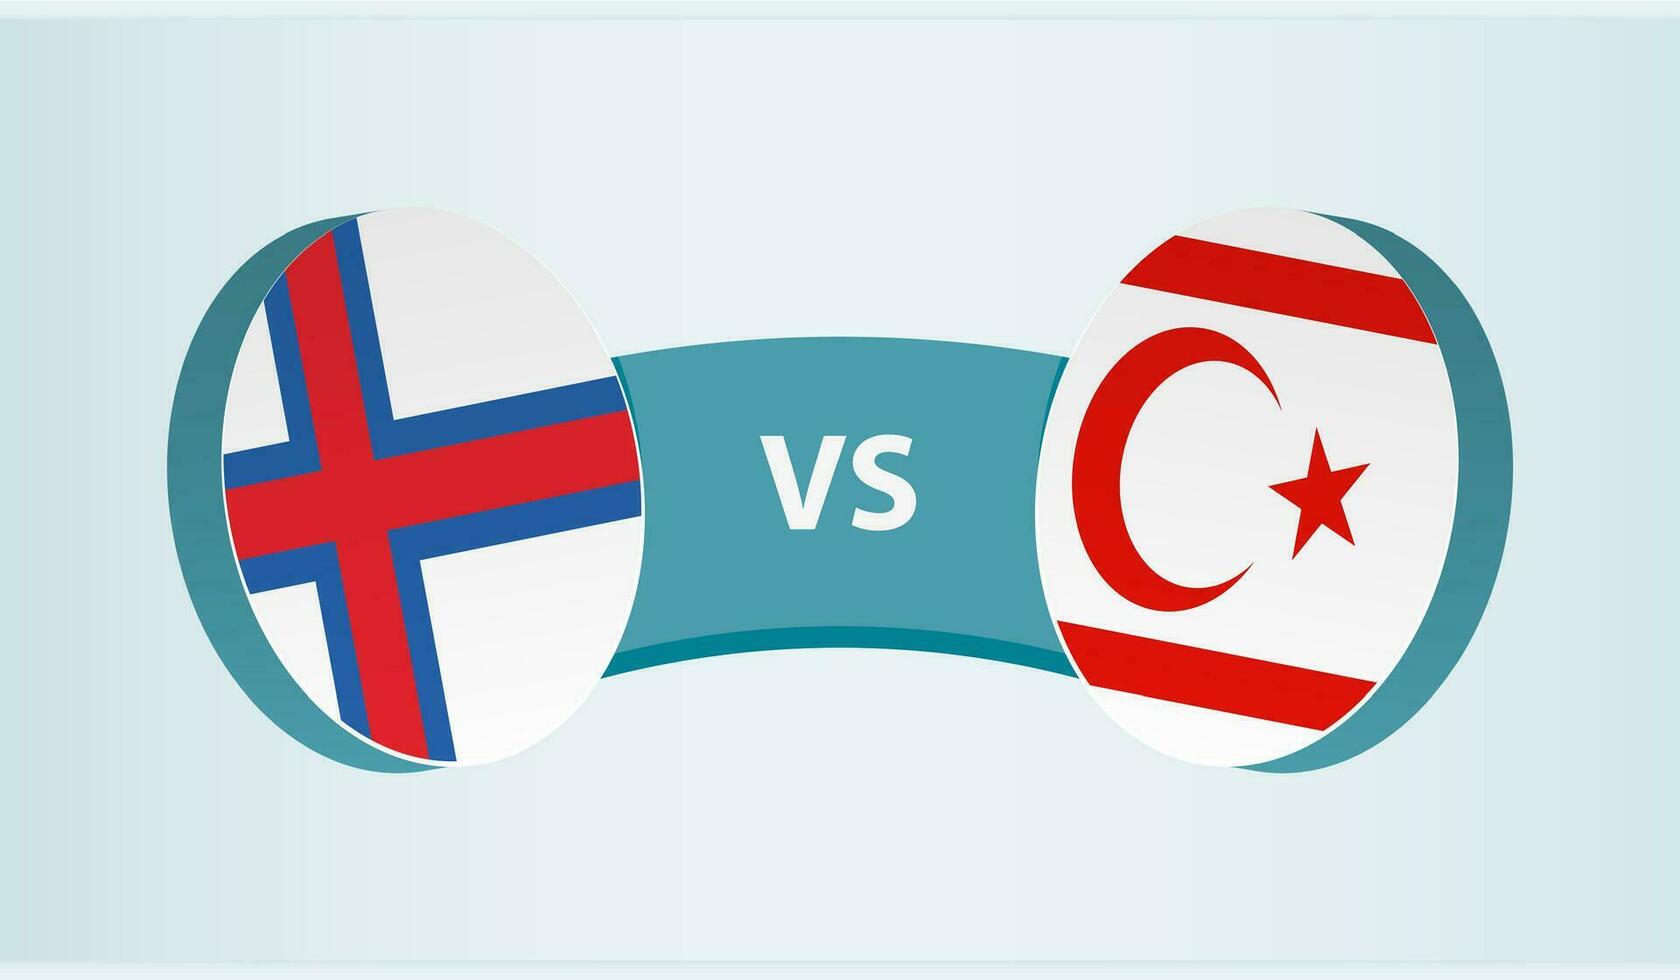 Faroe Islands versus Northern Cyprus, team sports competition concept. vector